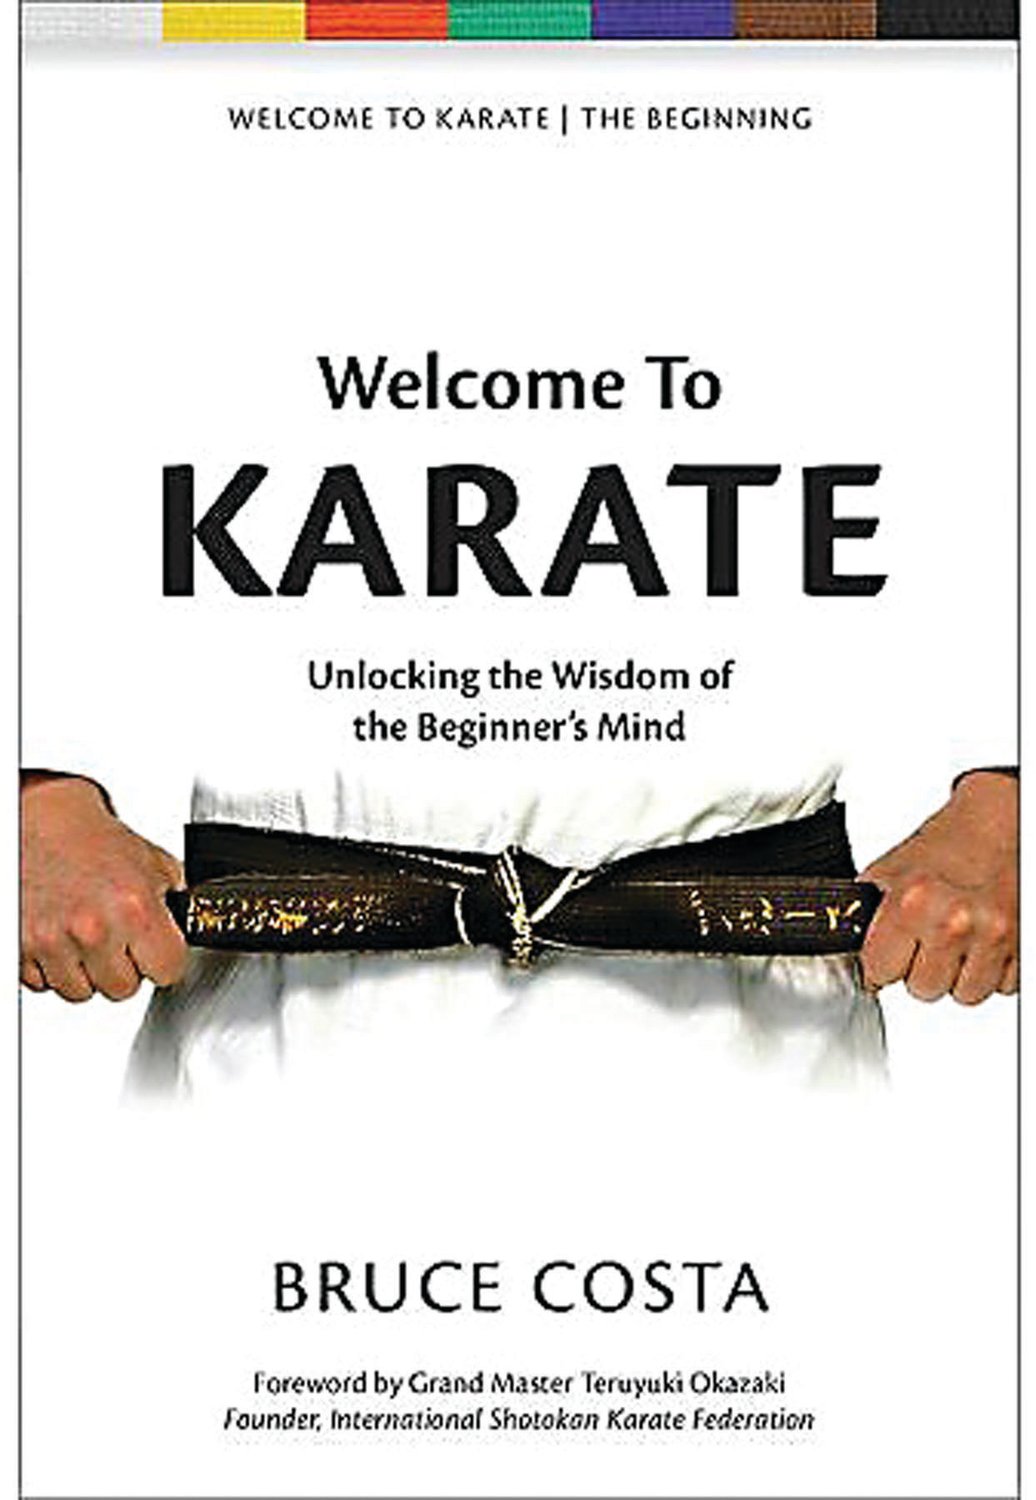 “Welcome To Karate: Unlocking the Wisdom of the Beginner’s Mind”